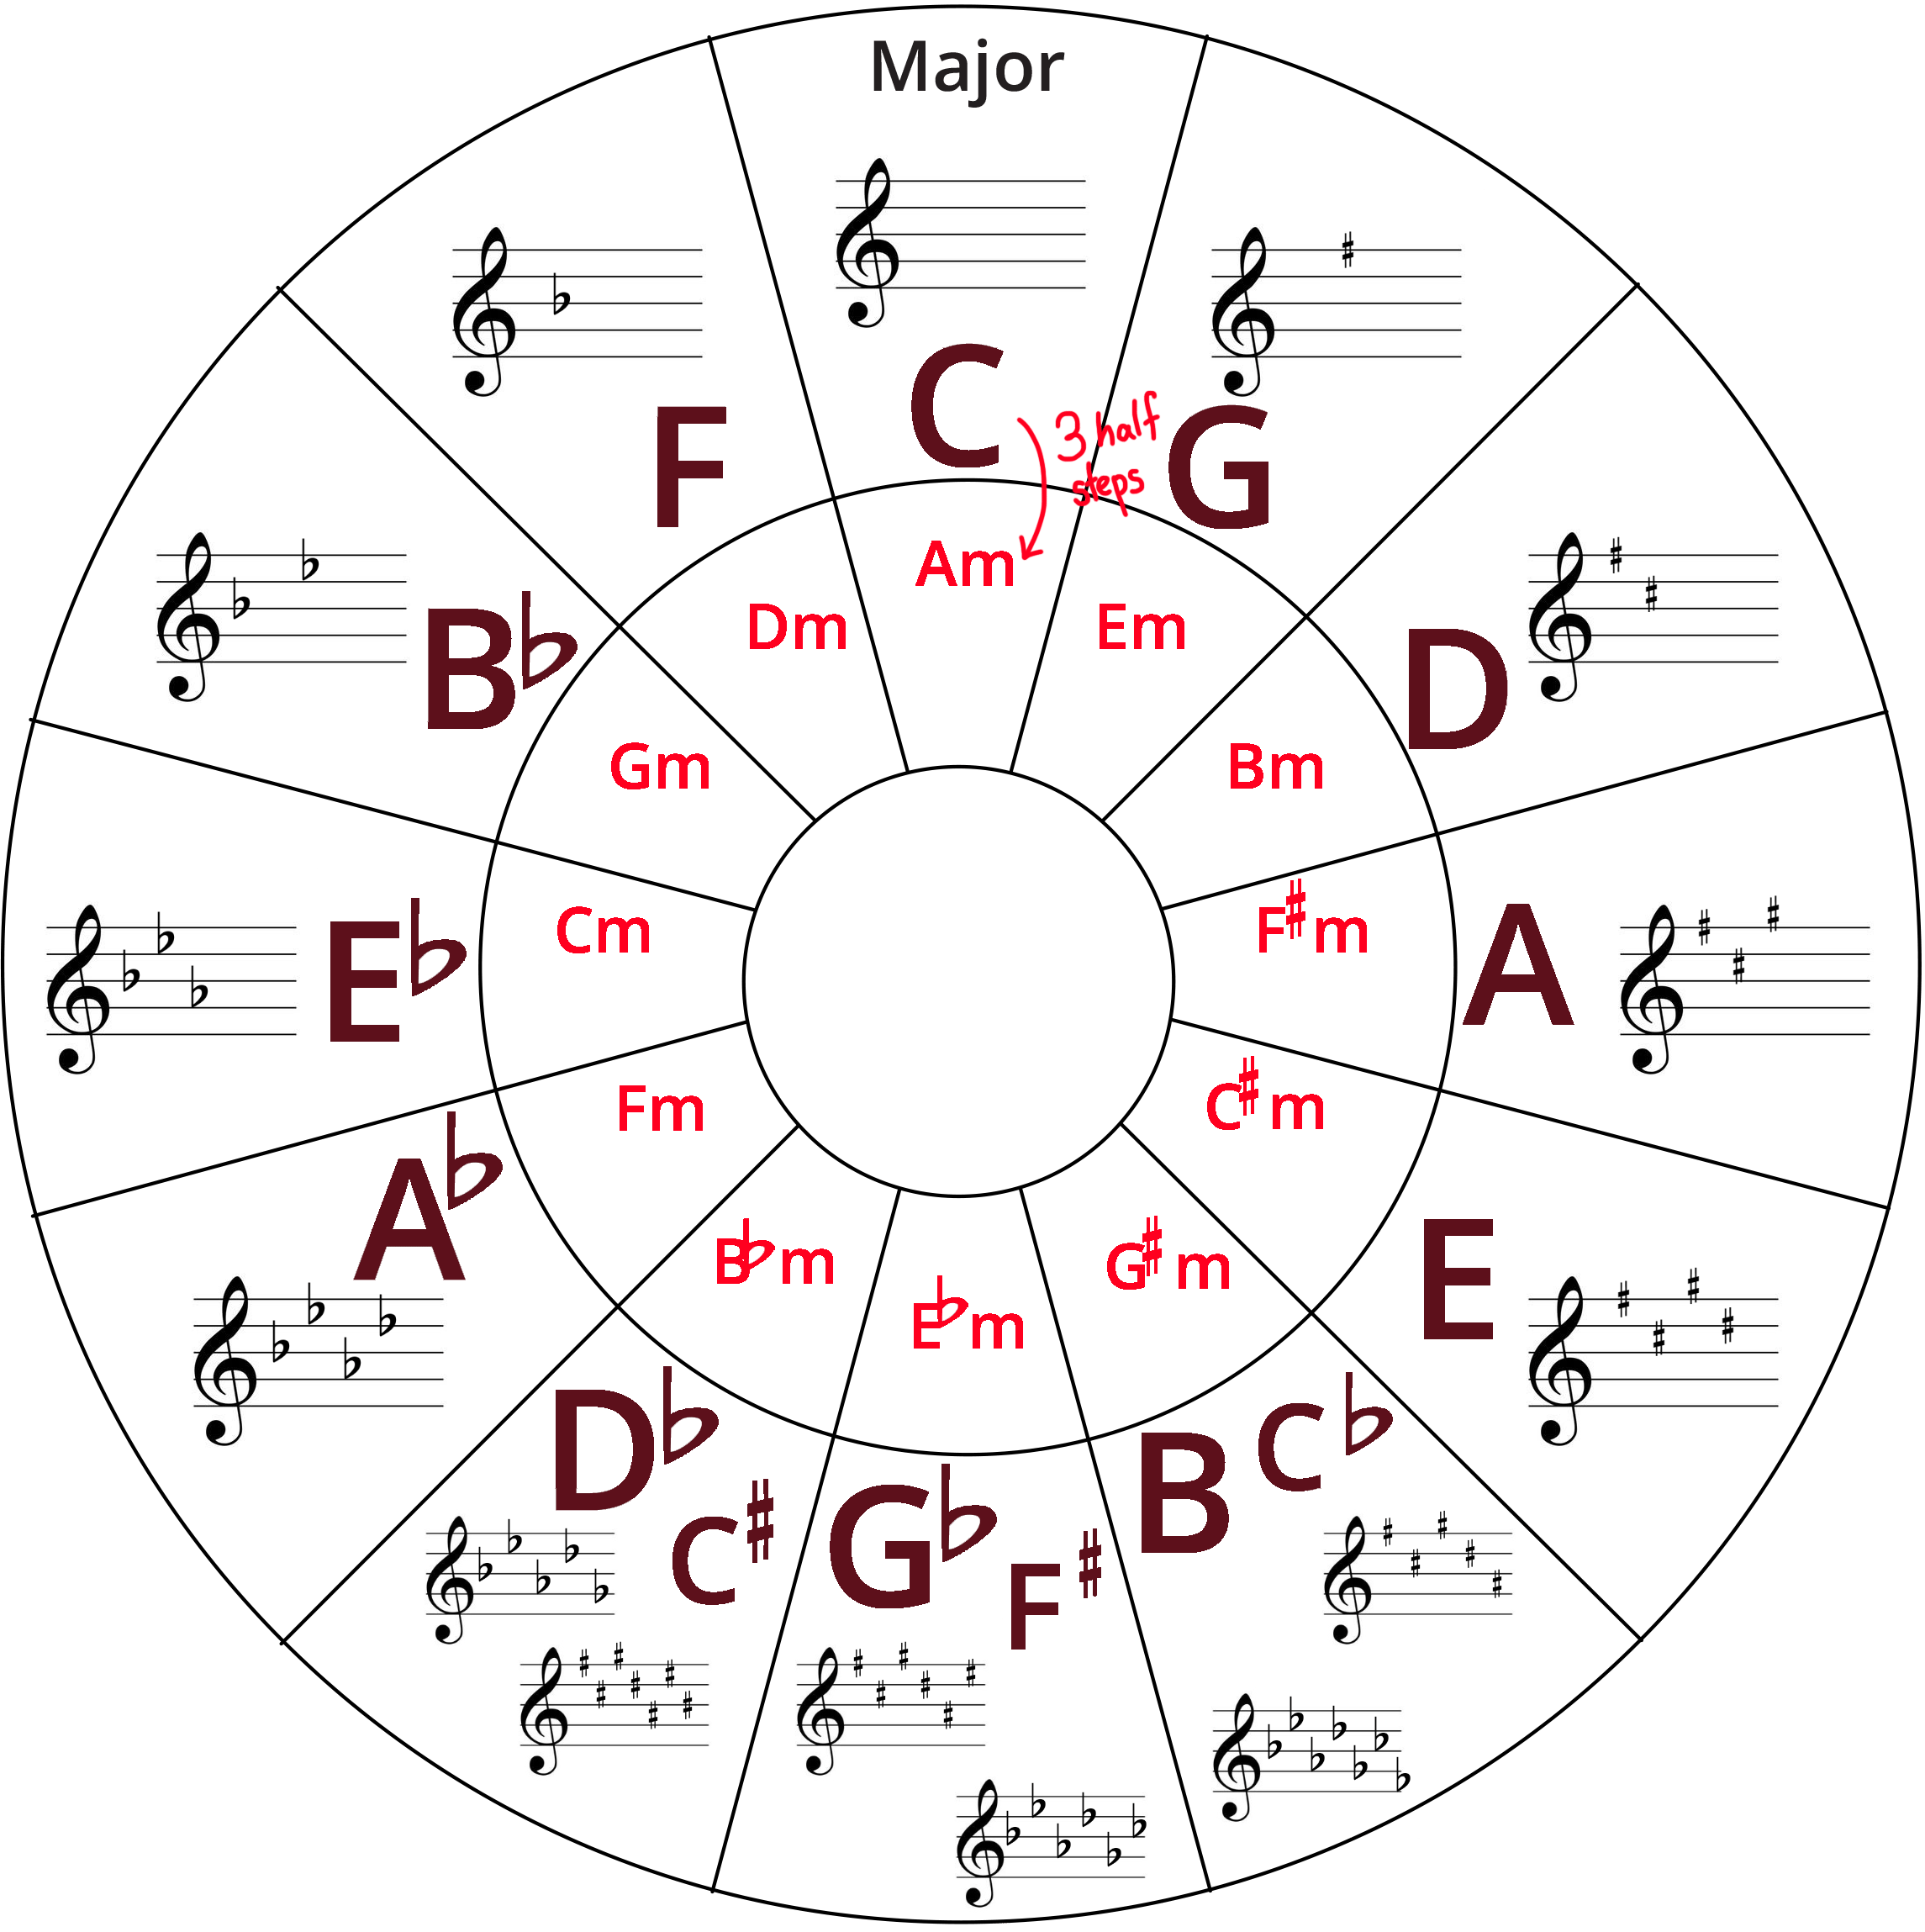 Circle of Fifths diagram with inner keys (minor) colored in red and outer keys (major) colored in burgundy.